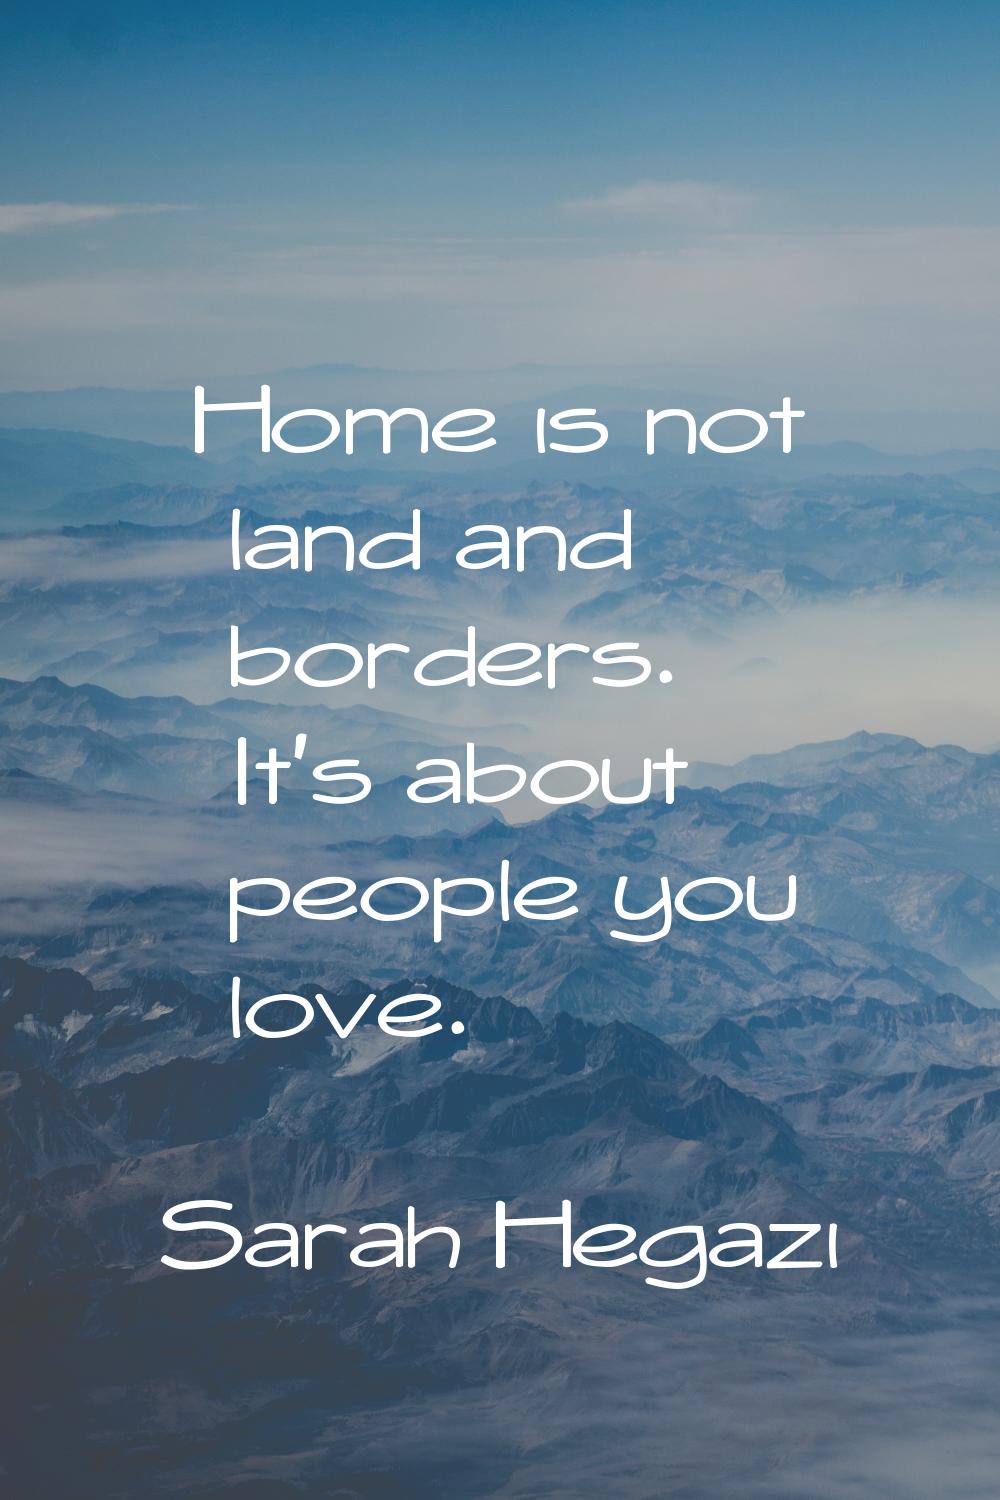 Home is not land and borders. It's about people you love.